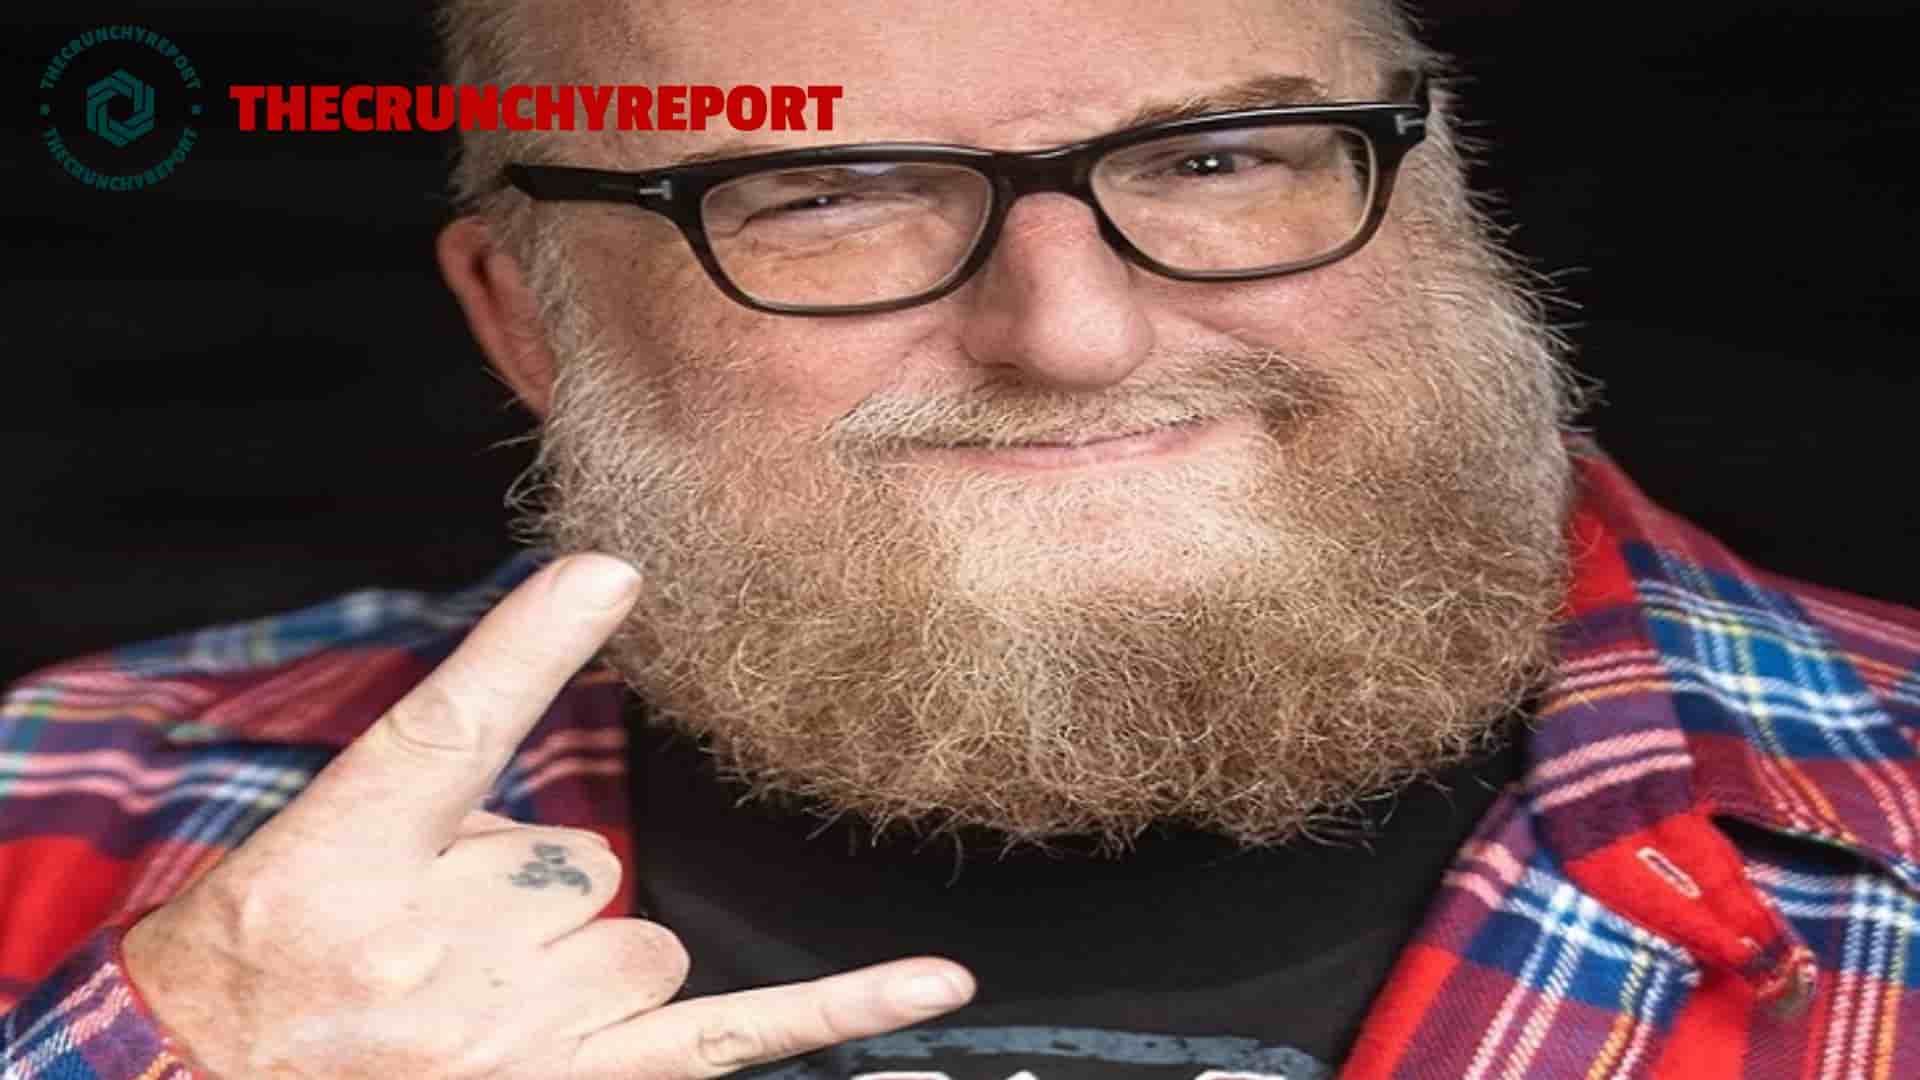 Brian Posehn Accident, Stand-Up Comedian Shared News Of Car Accident On Twitter, What Happened?